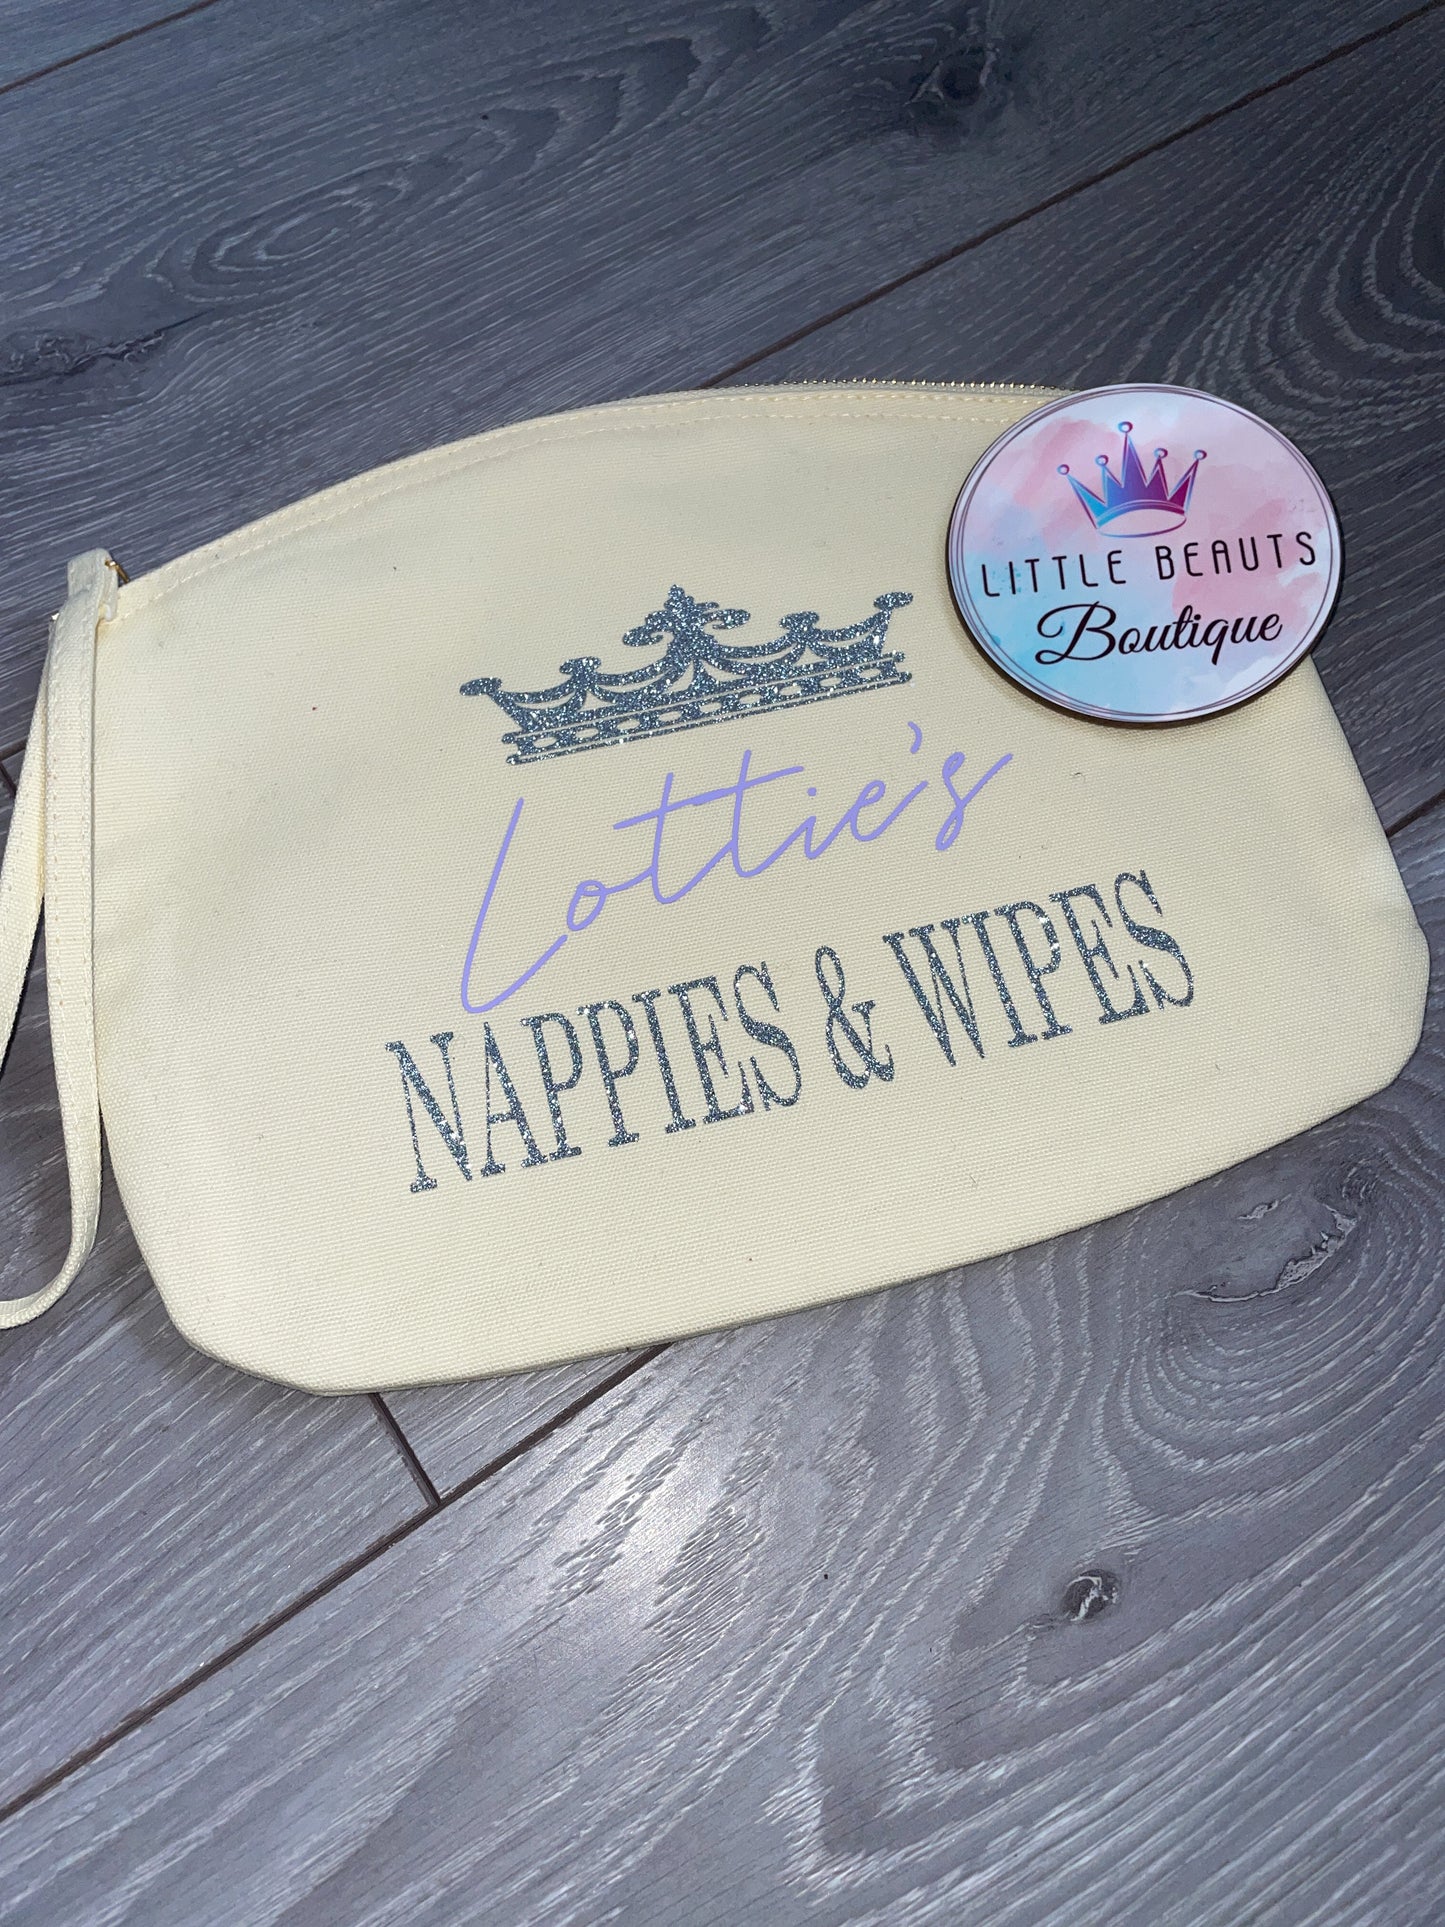 Personalised Zip Nappies & Wipes Bag With Wristlet - 4 Colours - 2 Sizes Available!